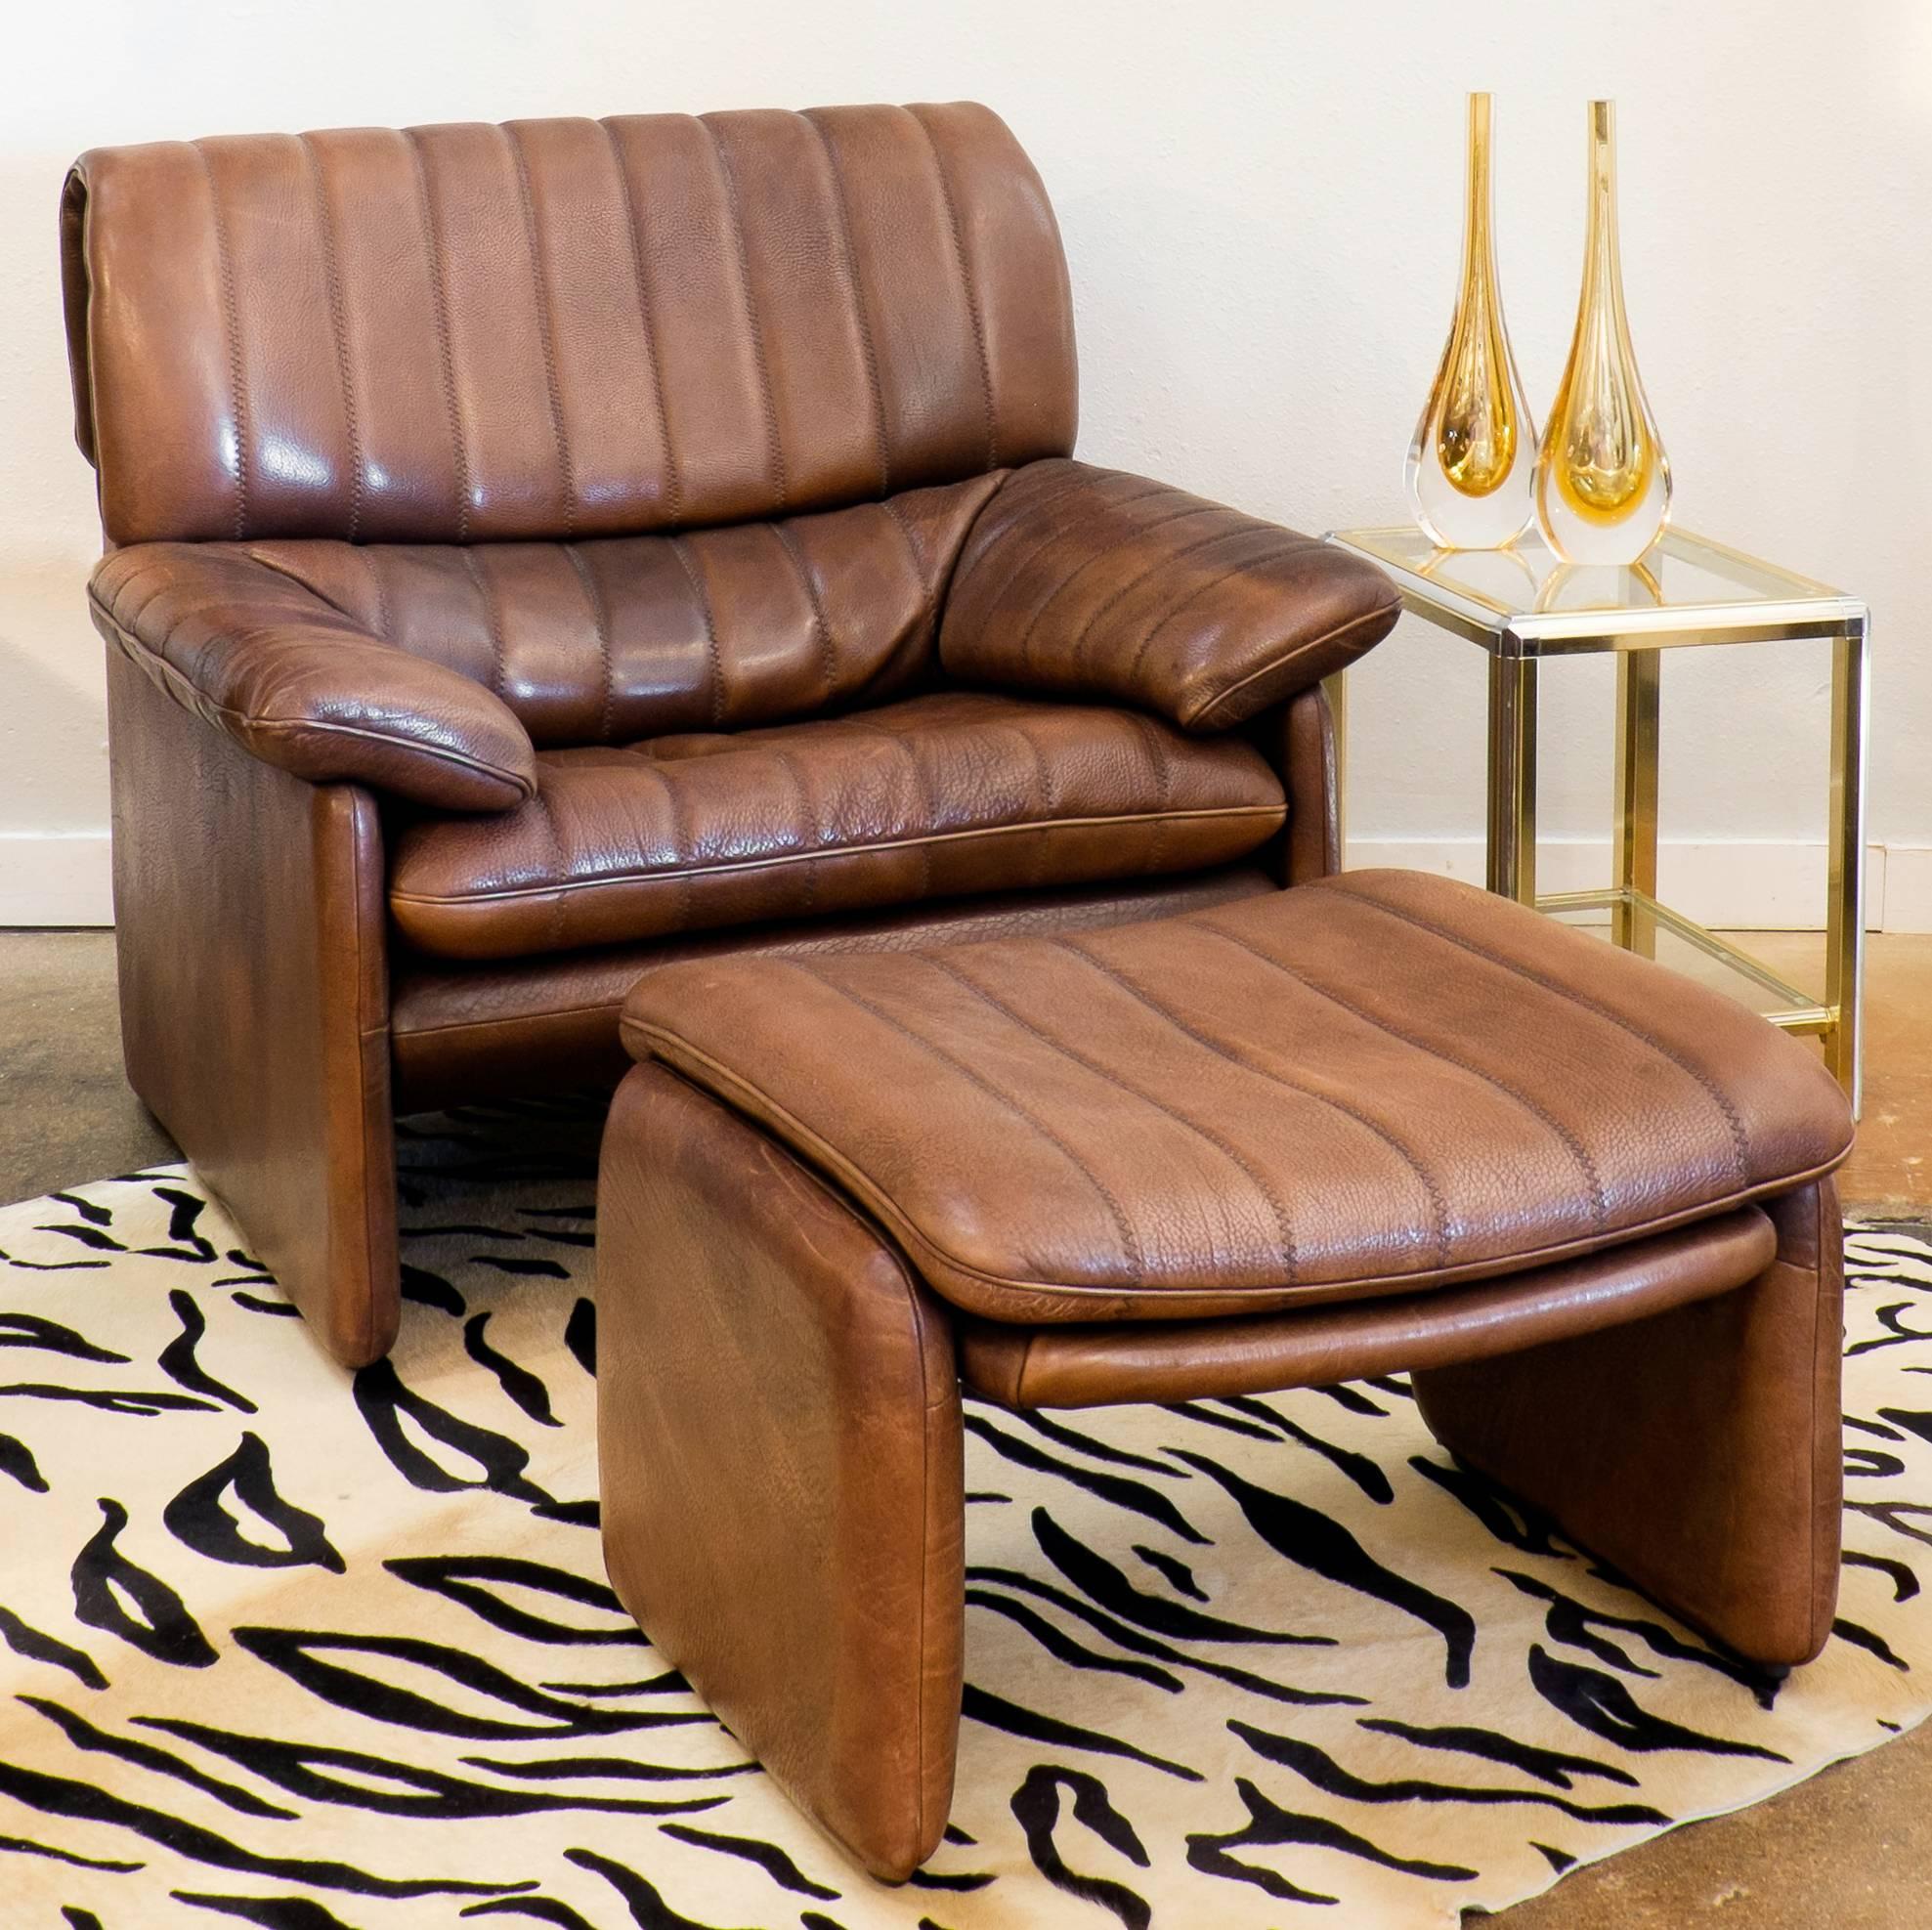 An ultra sleek vintage De Sede DS-85 soft leather armchair and ottoman in a sepia brown. This Swiss piece from the 1970s is undeniably comfortable, cushioned by a vertical patchwork of leather. Seat height measures 16.5 inches. Look at the matching